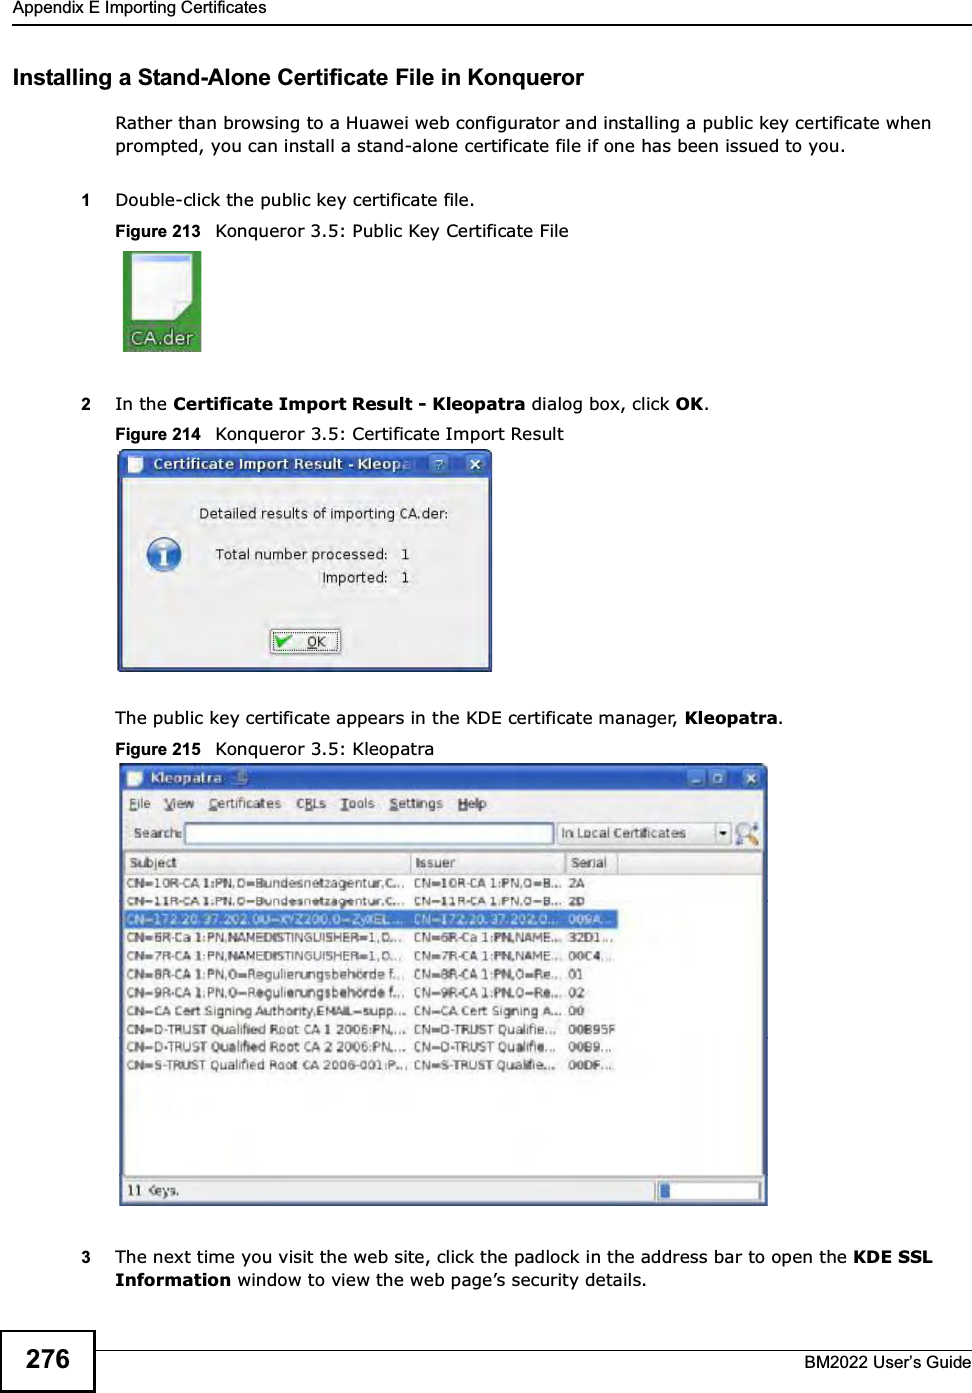 Appendix E Importing CertificatesBM2022 Users Guide276Installing a Stand-Alone Certificate File in KonquerorRather than browsing to a Huawei web configurator and installing a public key certificate when prompted, you can install a stand-alone certificate file if one has been issued to you.1Double-click the public key certificate file.Figure 213   Konqueror 3.5: Public Key Certificate File2In the Certificate Import Result - Kleopatra dialog box, click OK.Figure 214   Konqueror 3.5: Certificate Import ResultThe public key certificate appears in the KDE certificate manager, Kleopatra.Figure 215   Konqueror 3.5: Kleopatra3The next time you visit the web site, click the padlock in the address bar to open the KDE SSL Information window to view the web pages security details.